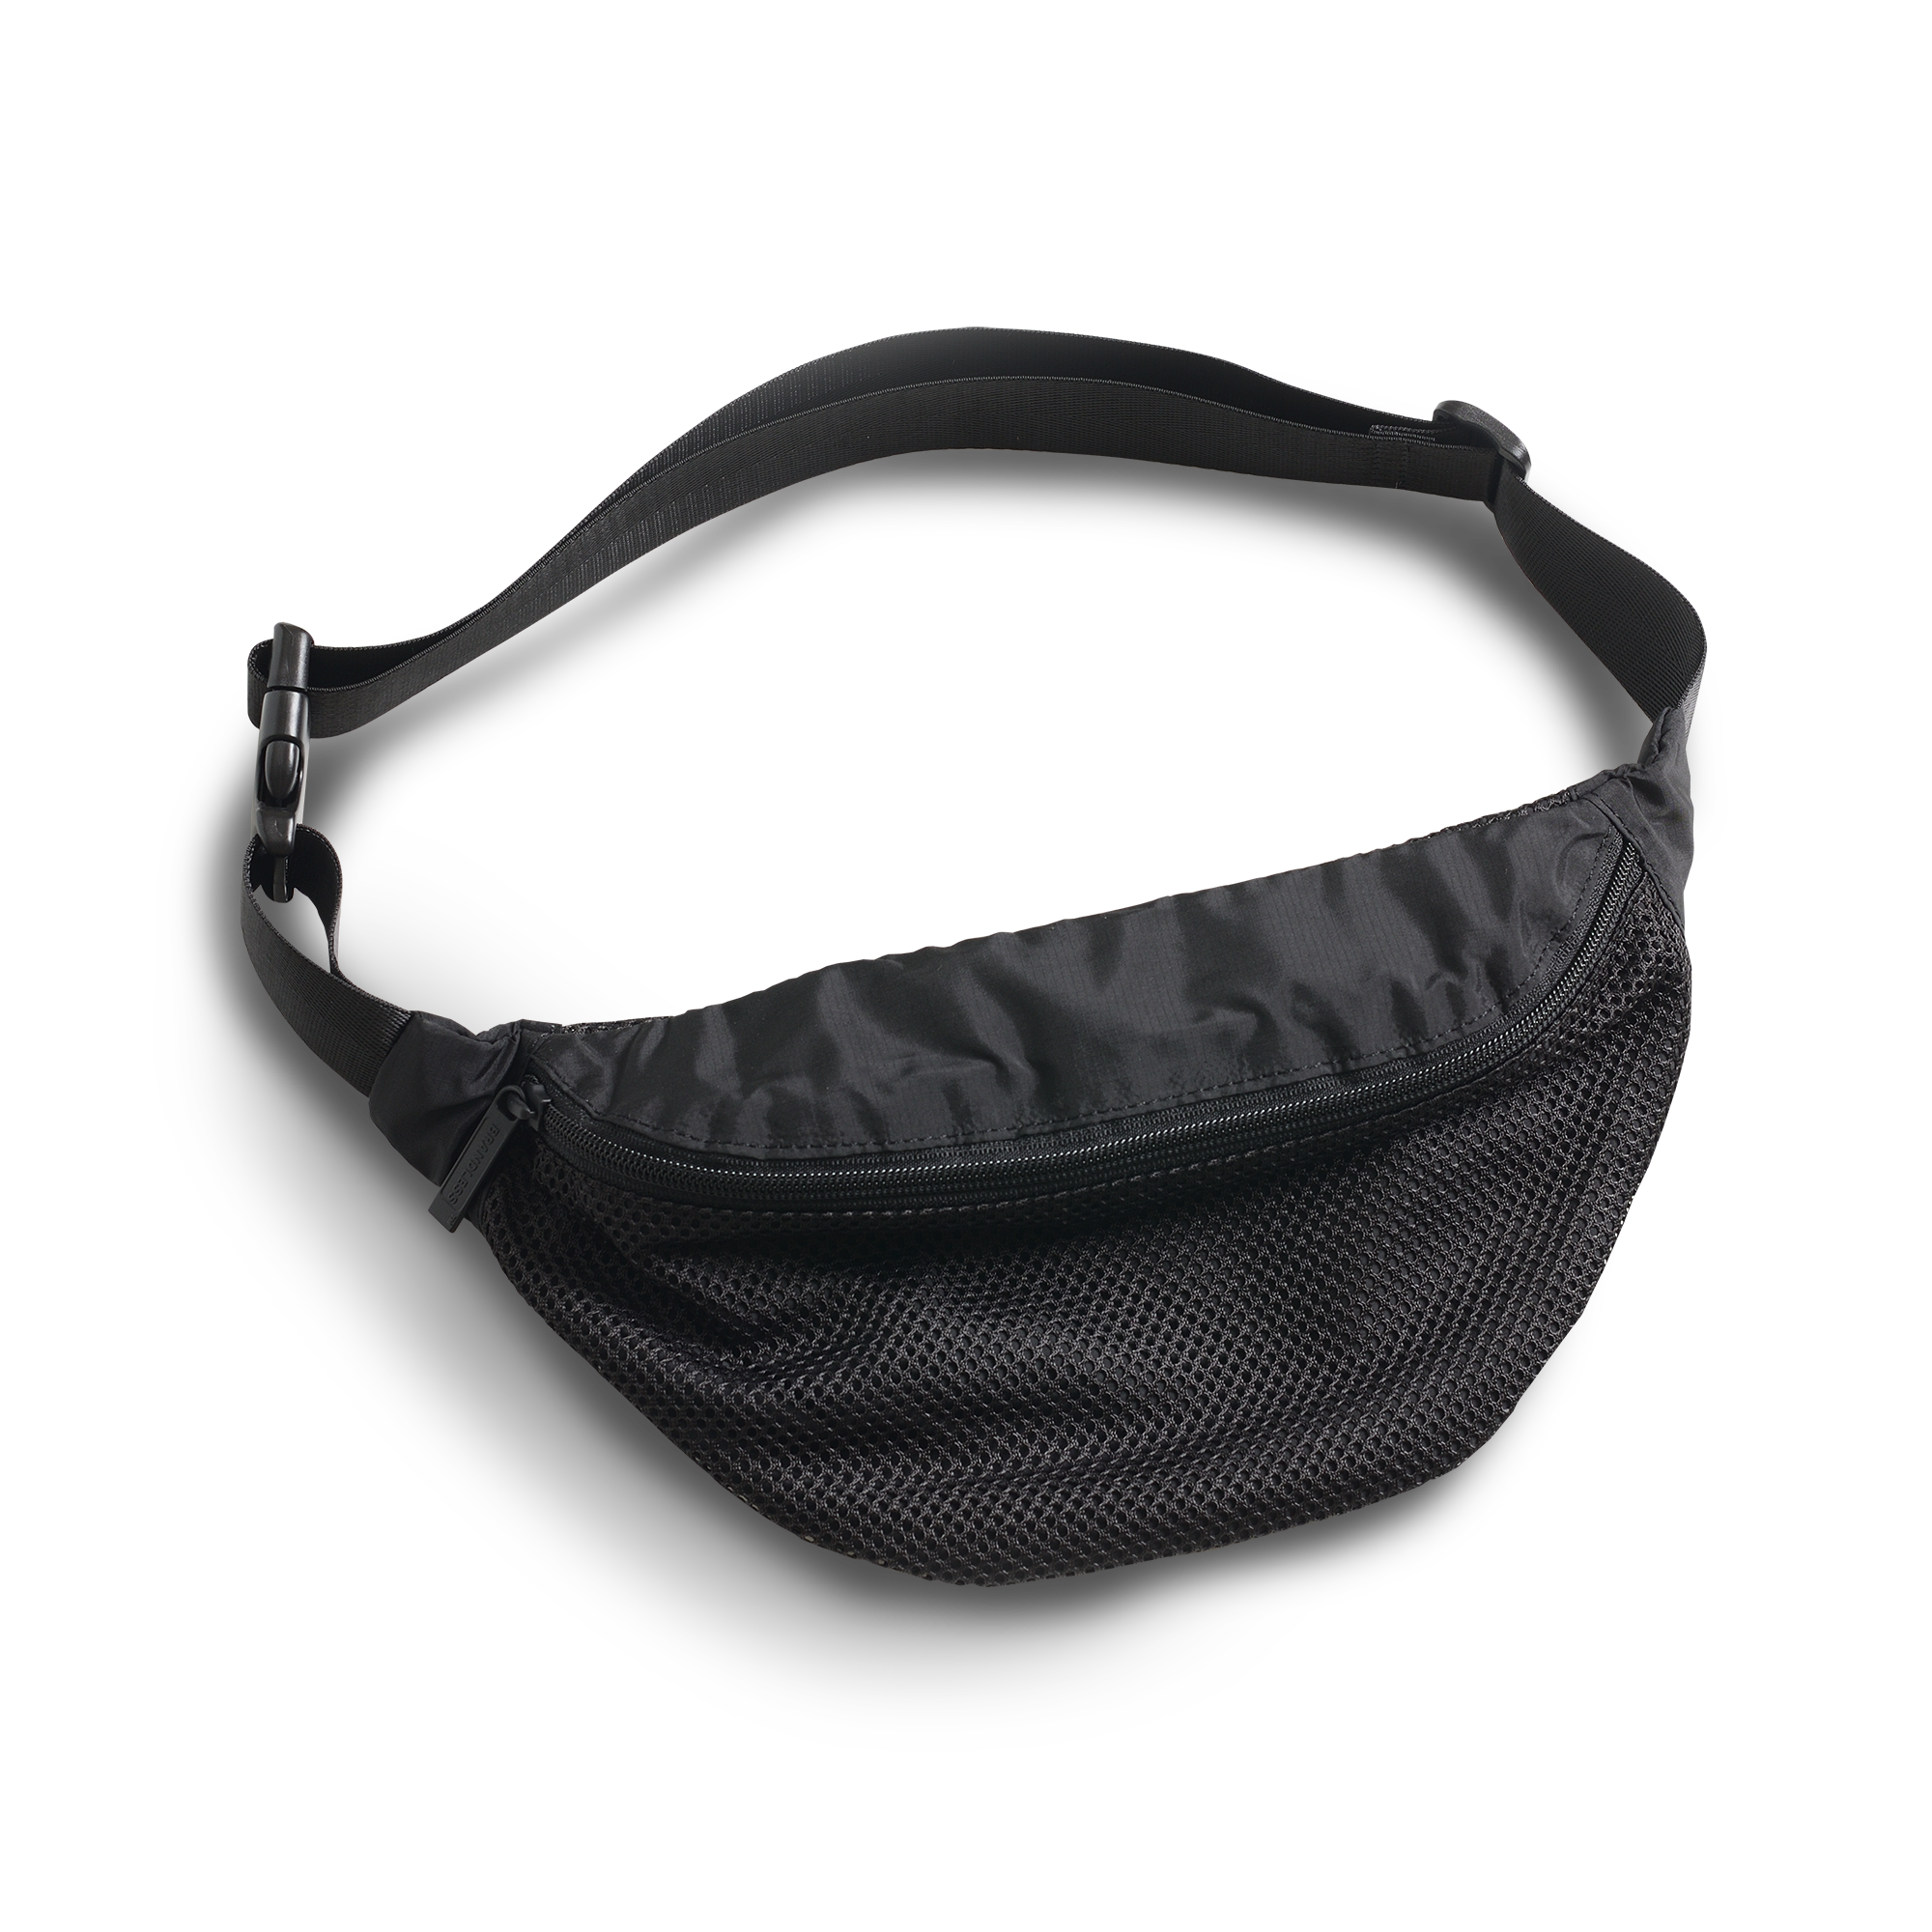 Fanny Pack Bag Free PNG